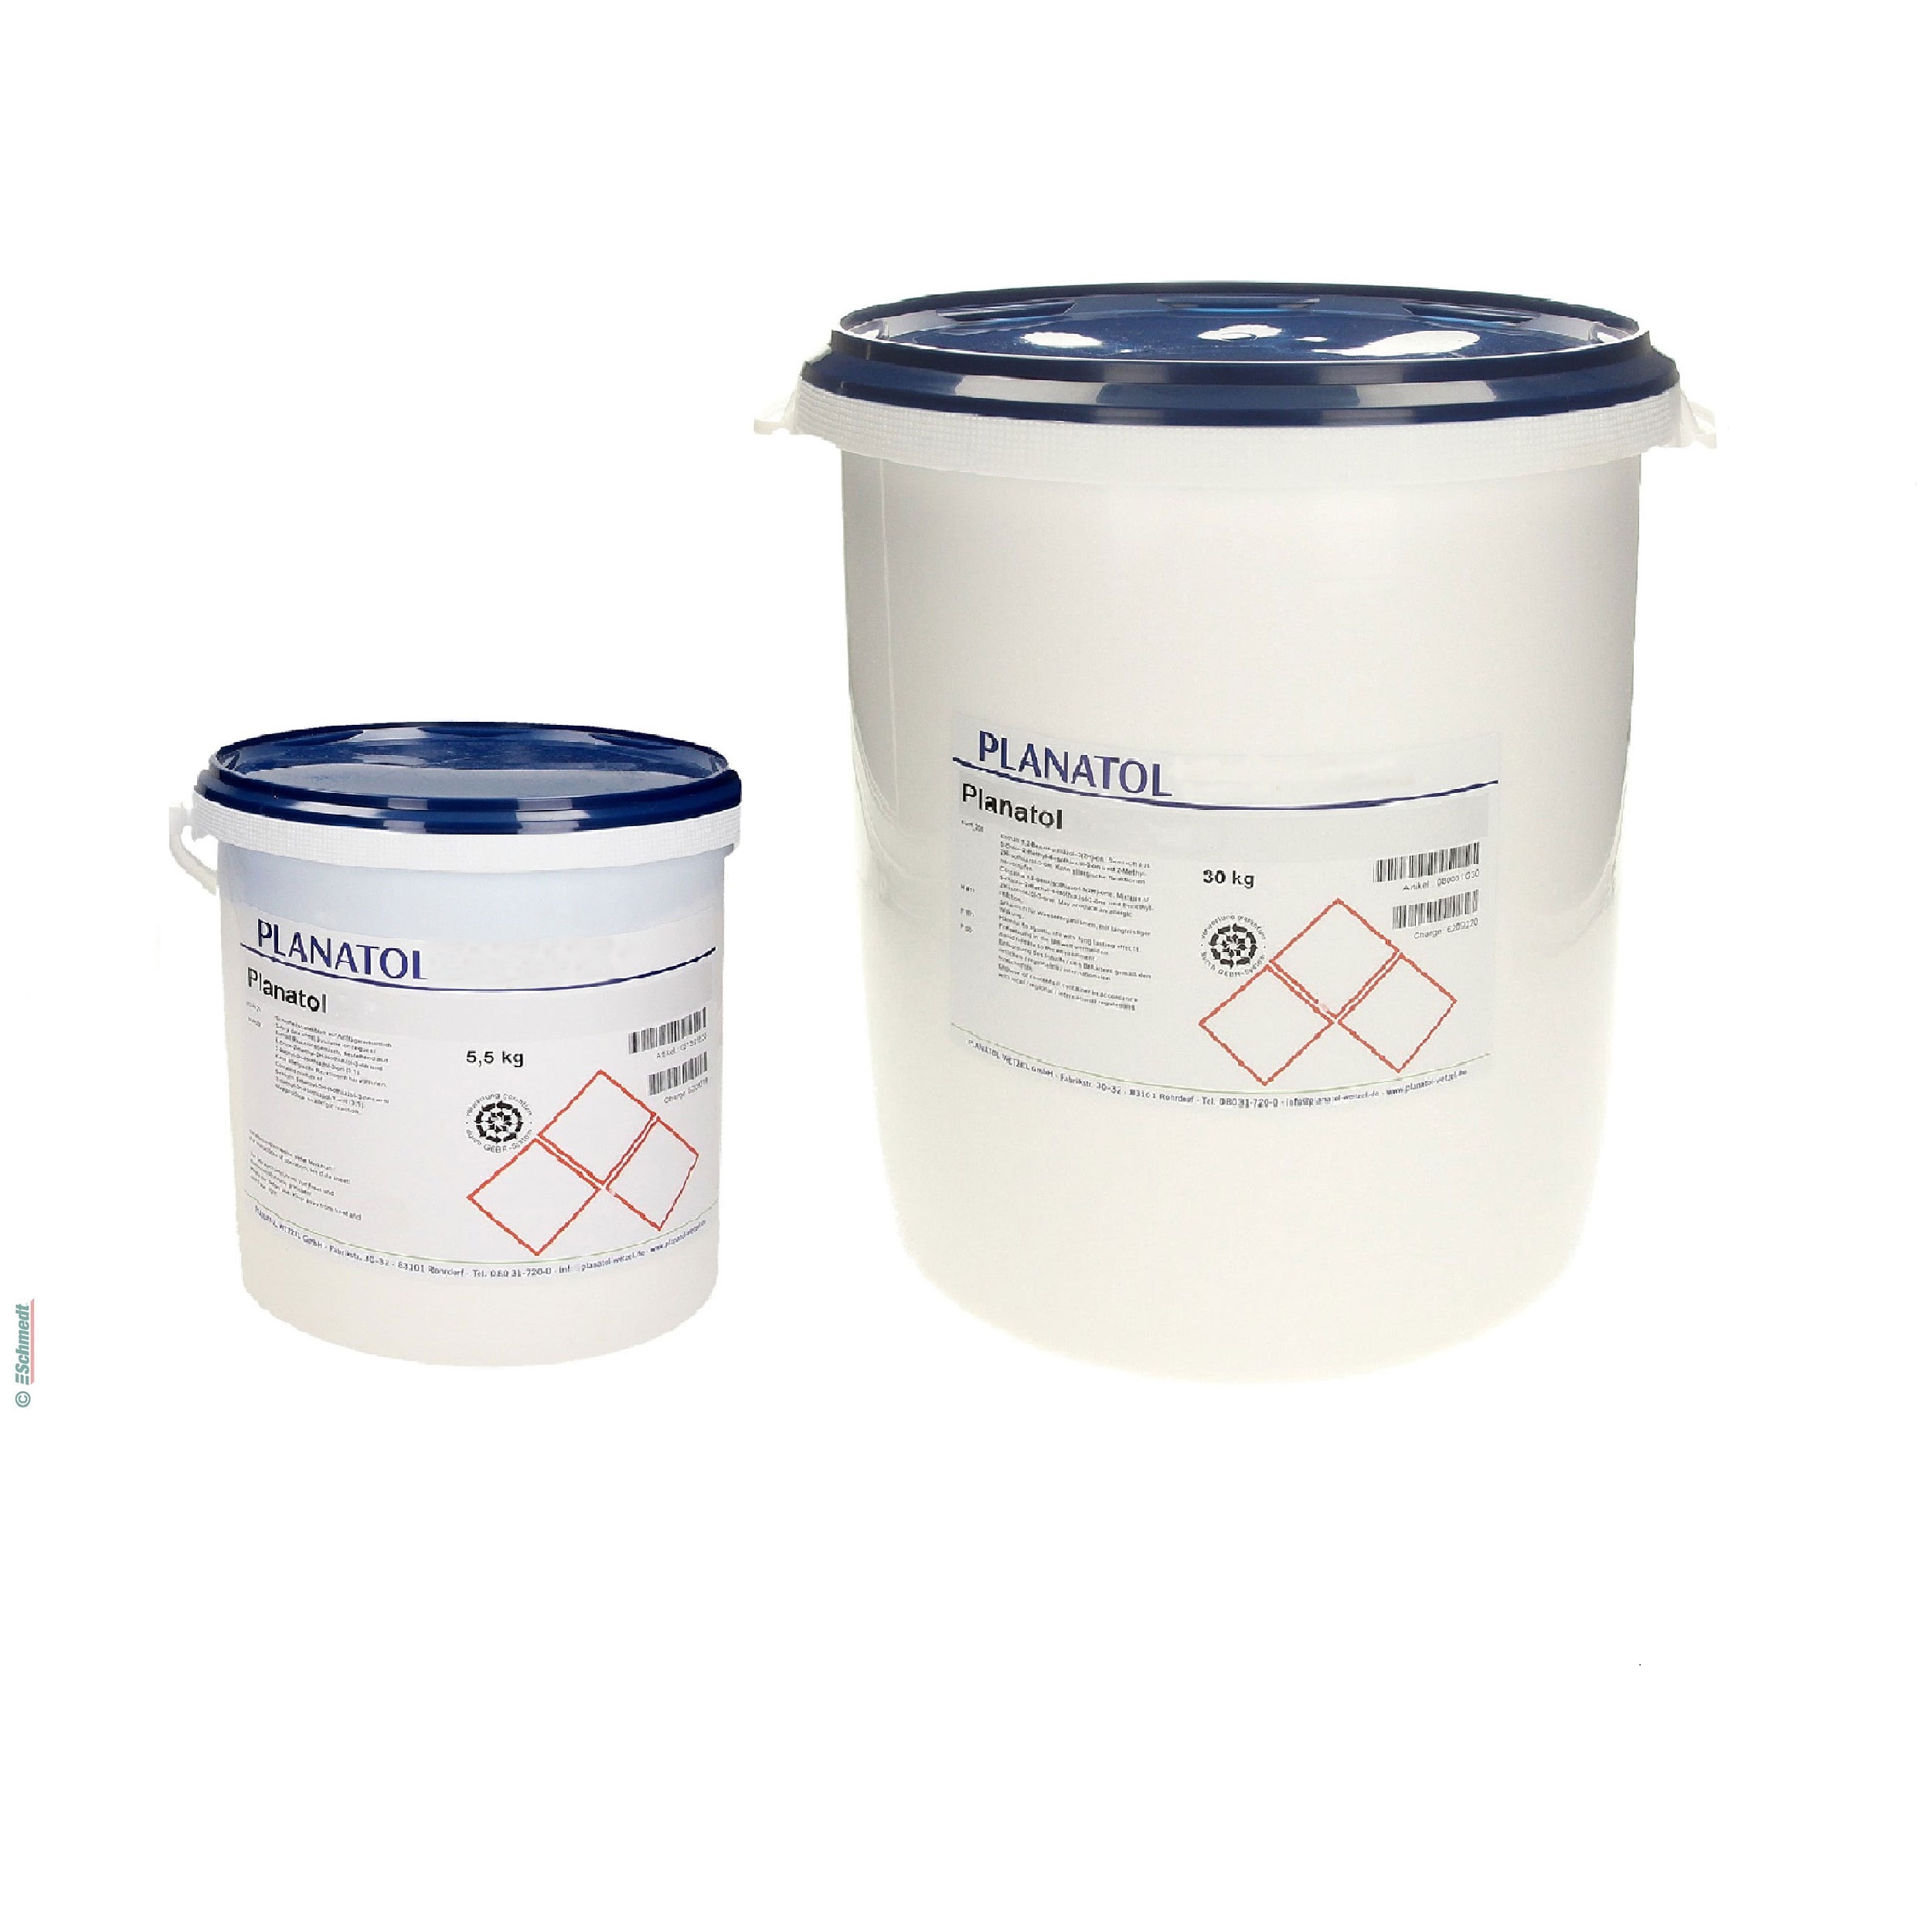 Planatol RH 8 - Starch paste, viscid - for gluing untreated, uncoated papers, cardboard and binding cloth, endsheet gluing, casing-in, label...